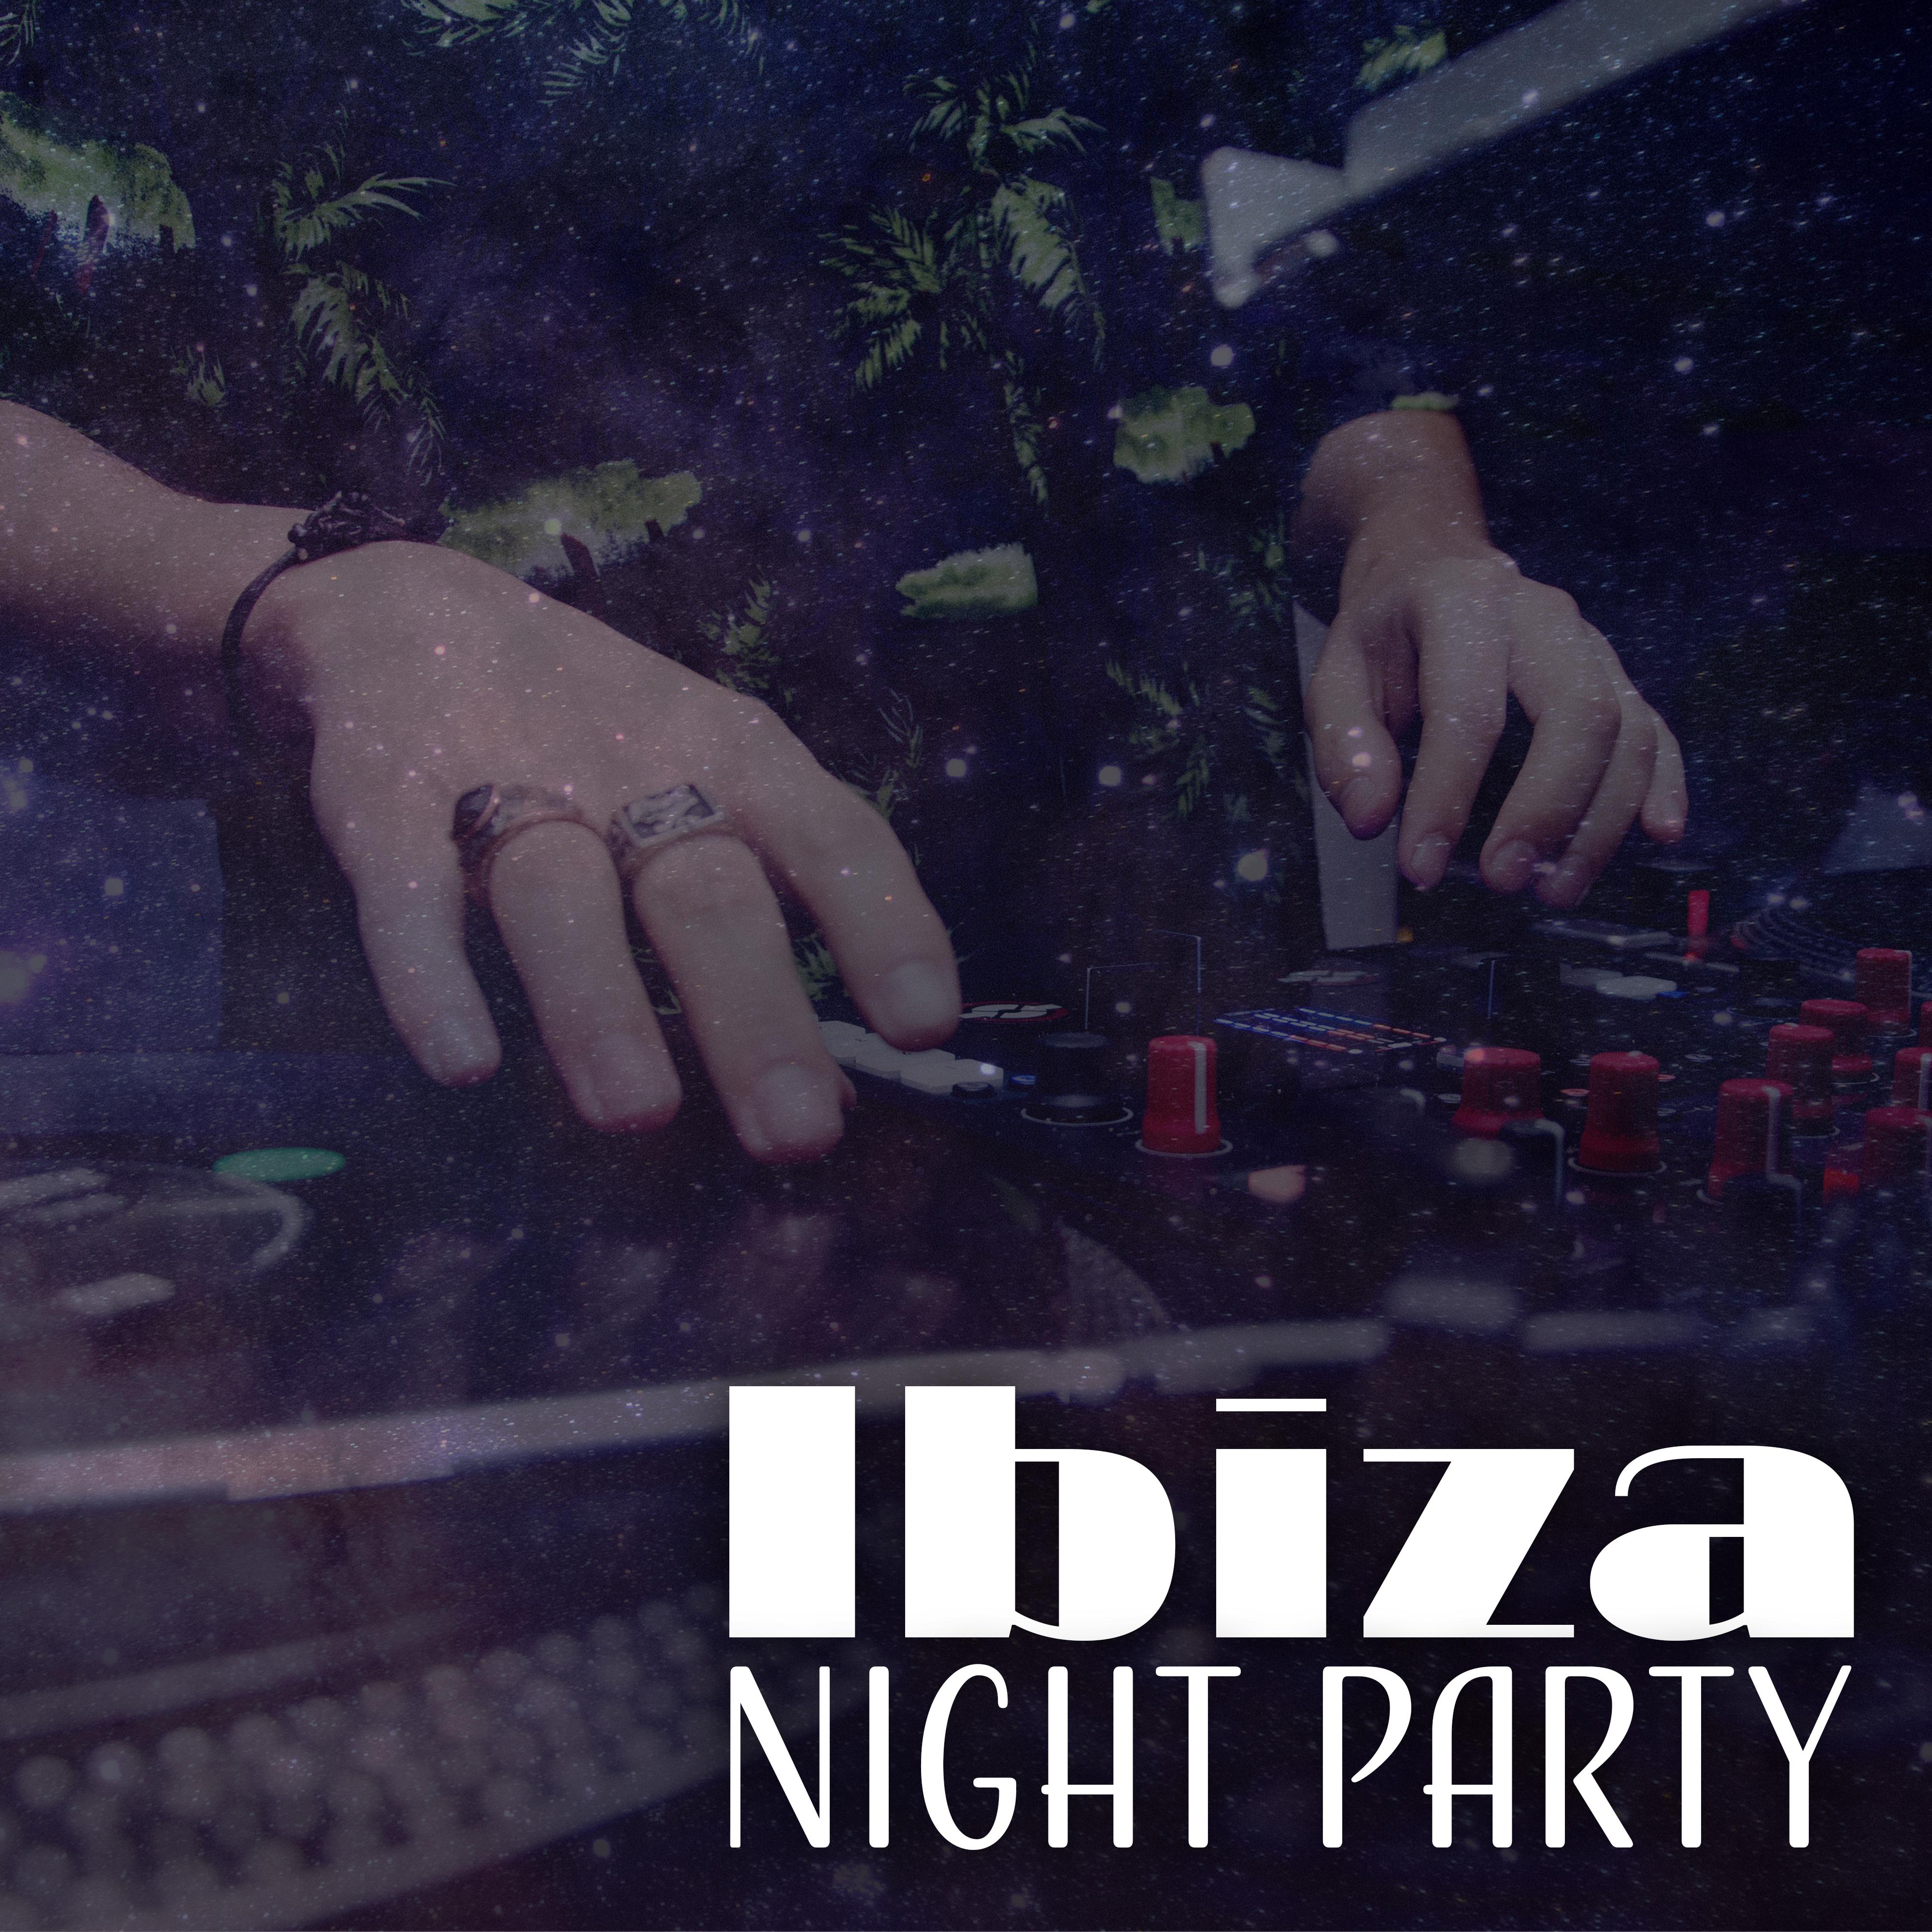 Ibiza Night Party – Chill Out to Dance, Party Hits 2017, Summertime, Relax